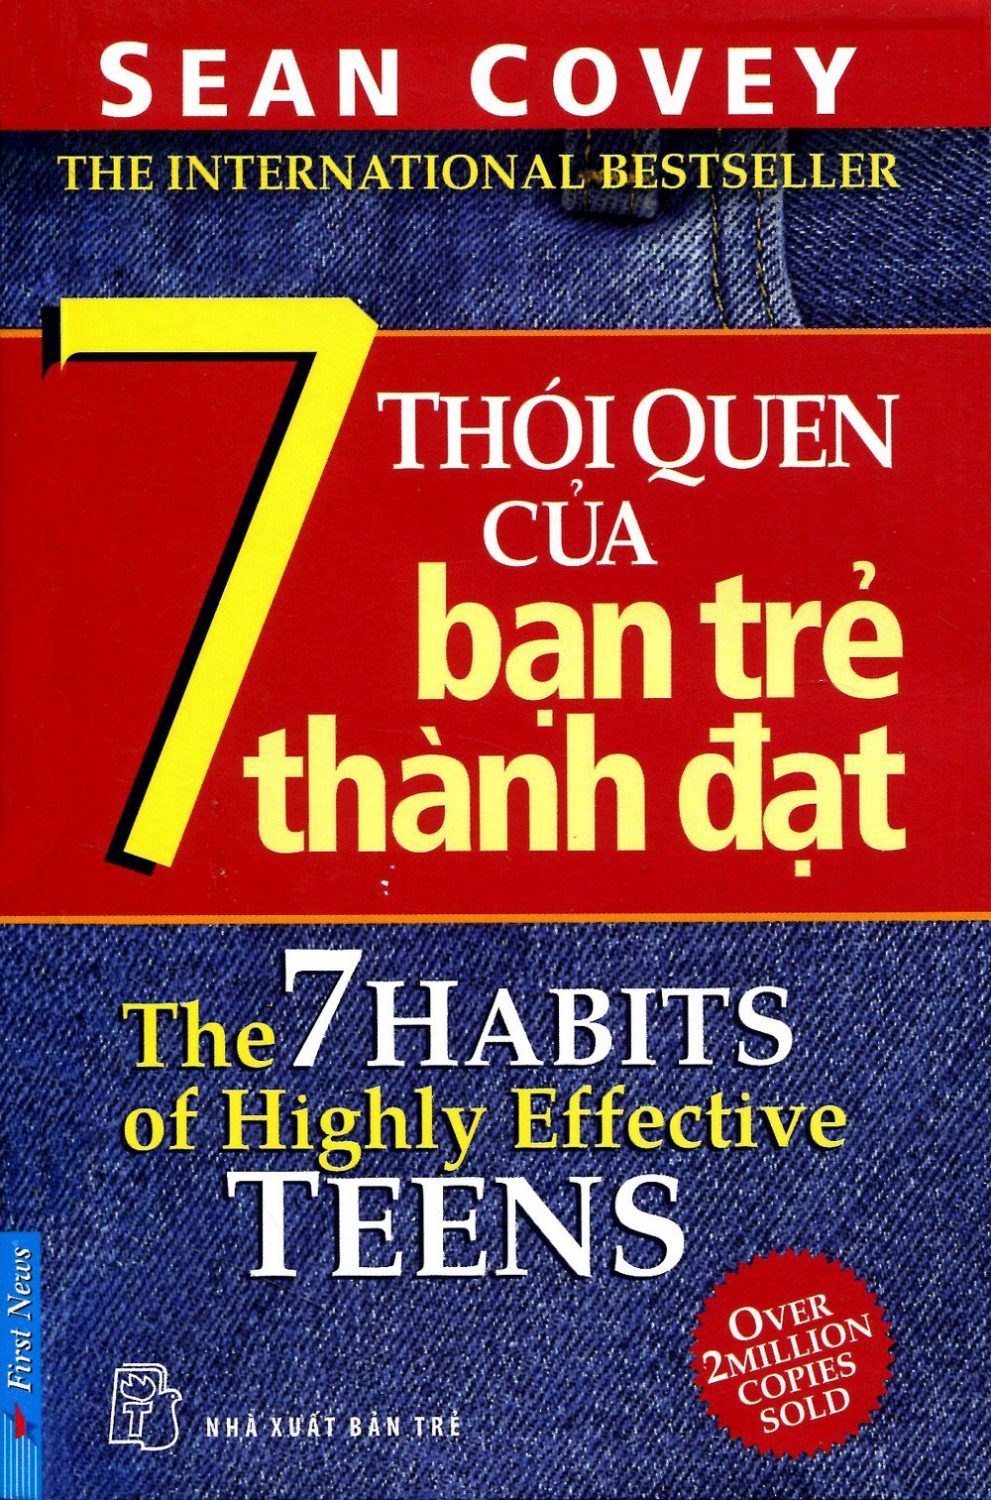 Bay Thoi Quen Cua Nguoi Thanh Dat – Stephen R. Covey Scaled